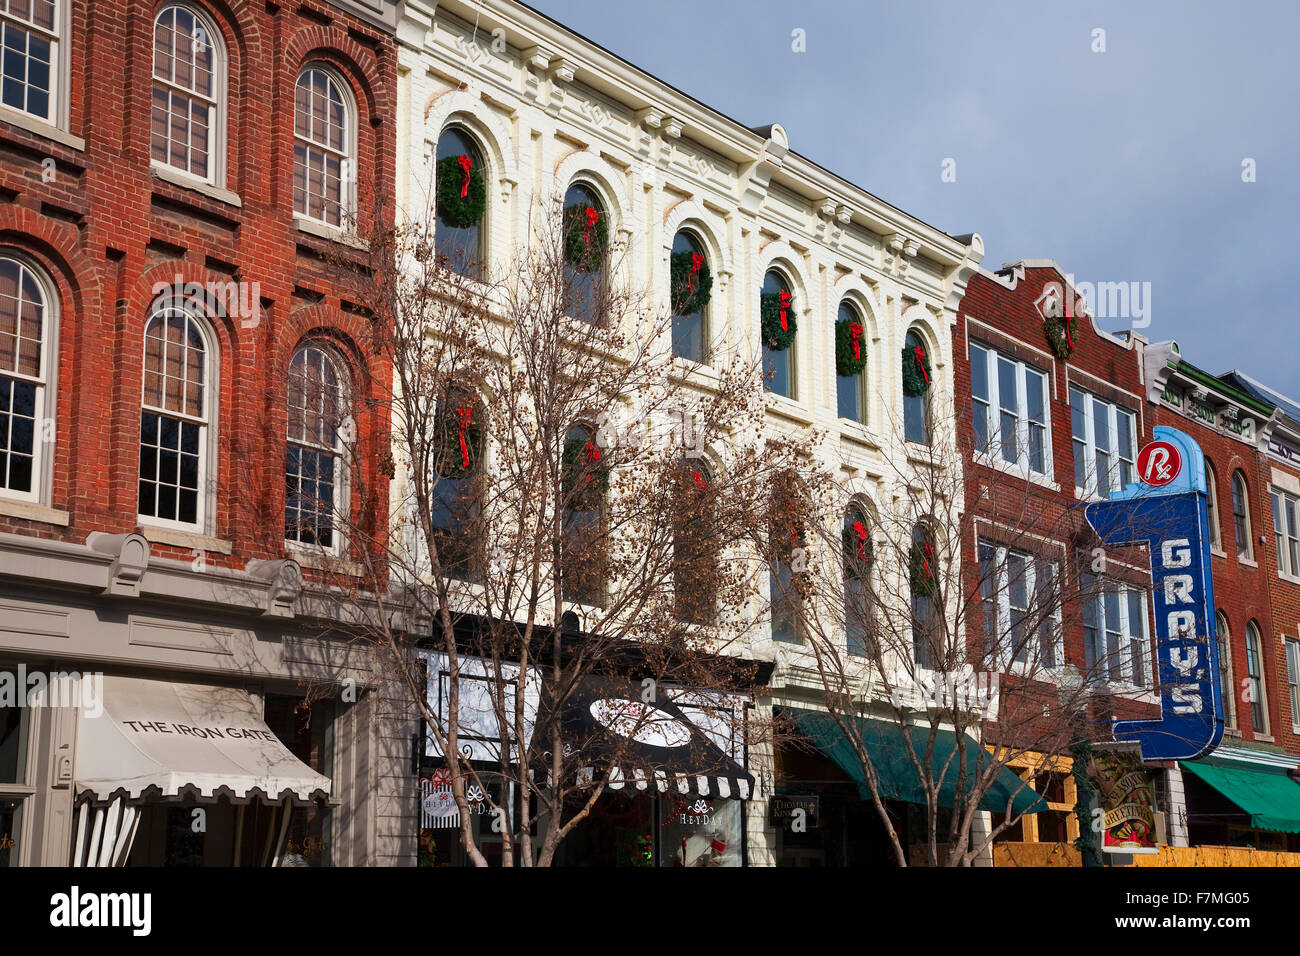 Historic Main Street with Red Brick Storefronts and Gray's Pharmacy in Franklin, Tennessee, a suburb south of Nashville, Williamson County, Tenn. Stock Photo